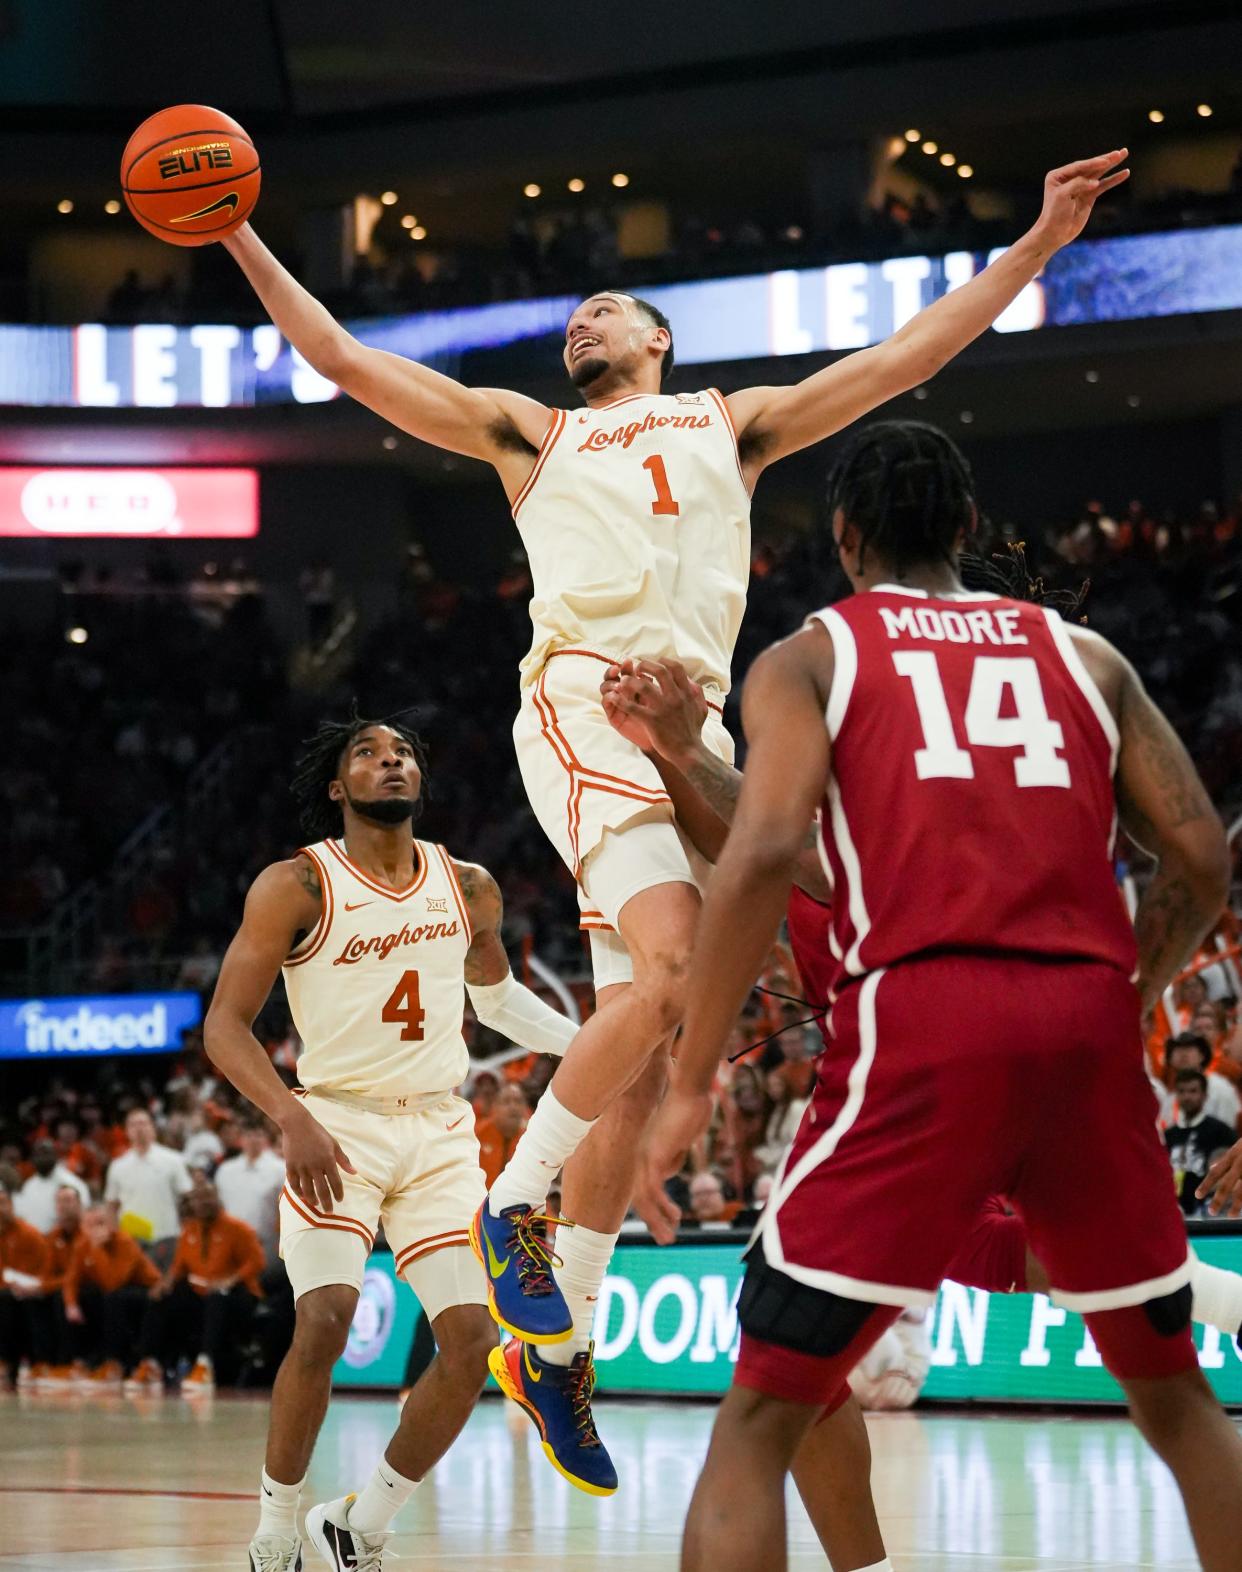 Texas forward Dylan Disu controls the ball in midair during the Longhorns' regular season-ending win over Oklahoma at Moody Center. Disu and the Longhorns, seeded seventh in the NCAA Tournament, open against Colorado State in Thursday night's first round in Charlotte, N.C.